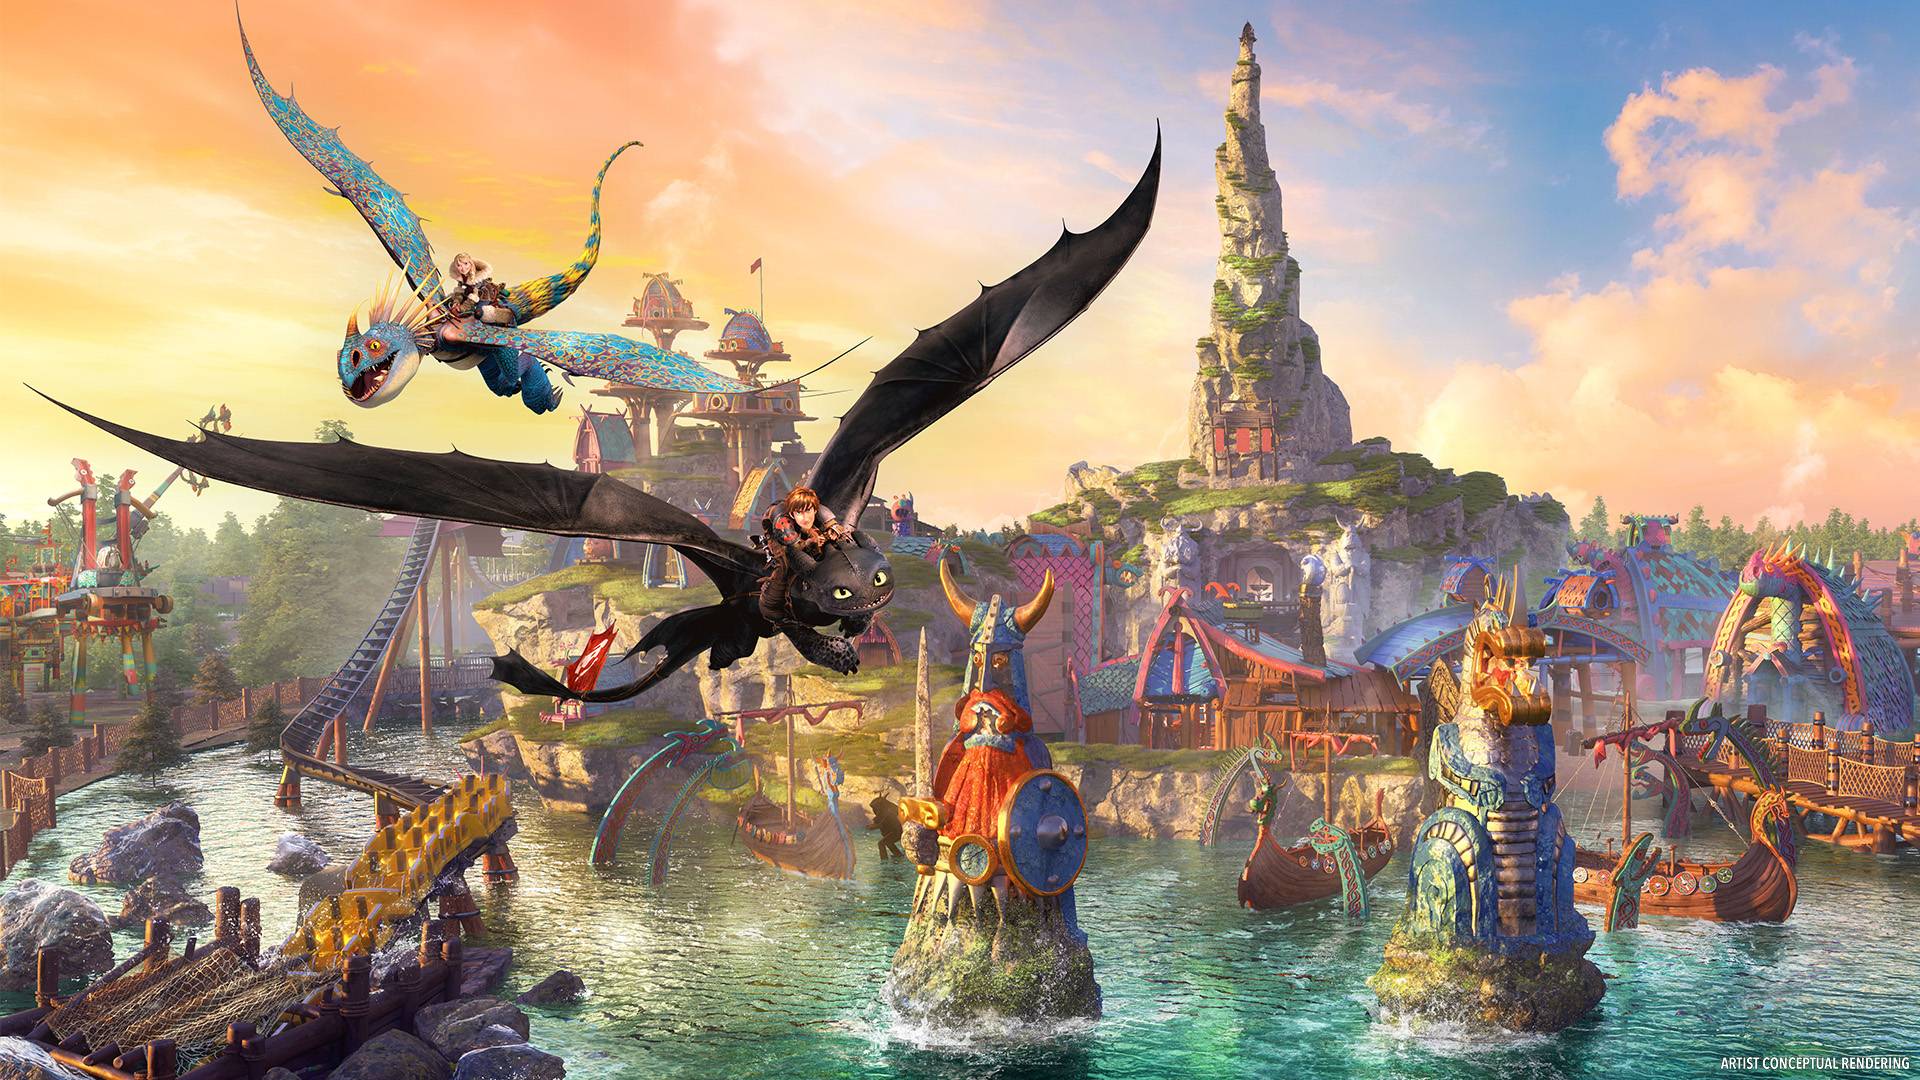 Universal Orlando reveals new details about 'How To Train Your Dragon - Isle Of Berk' coming to Epic Universe